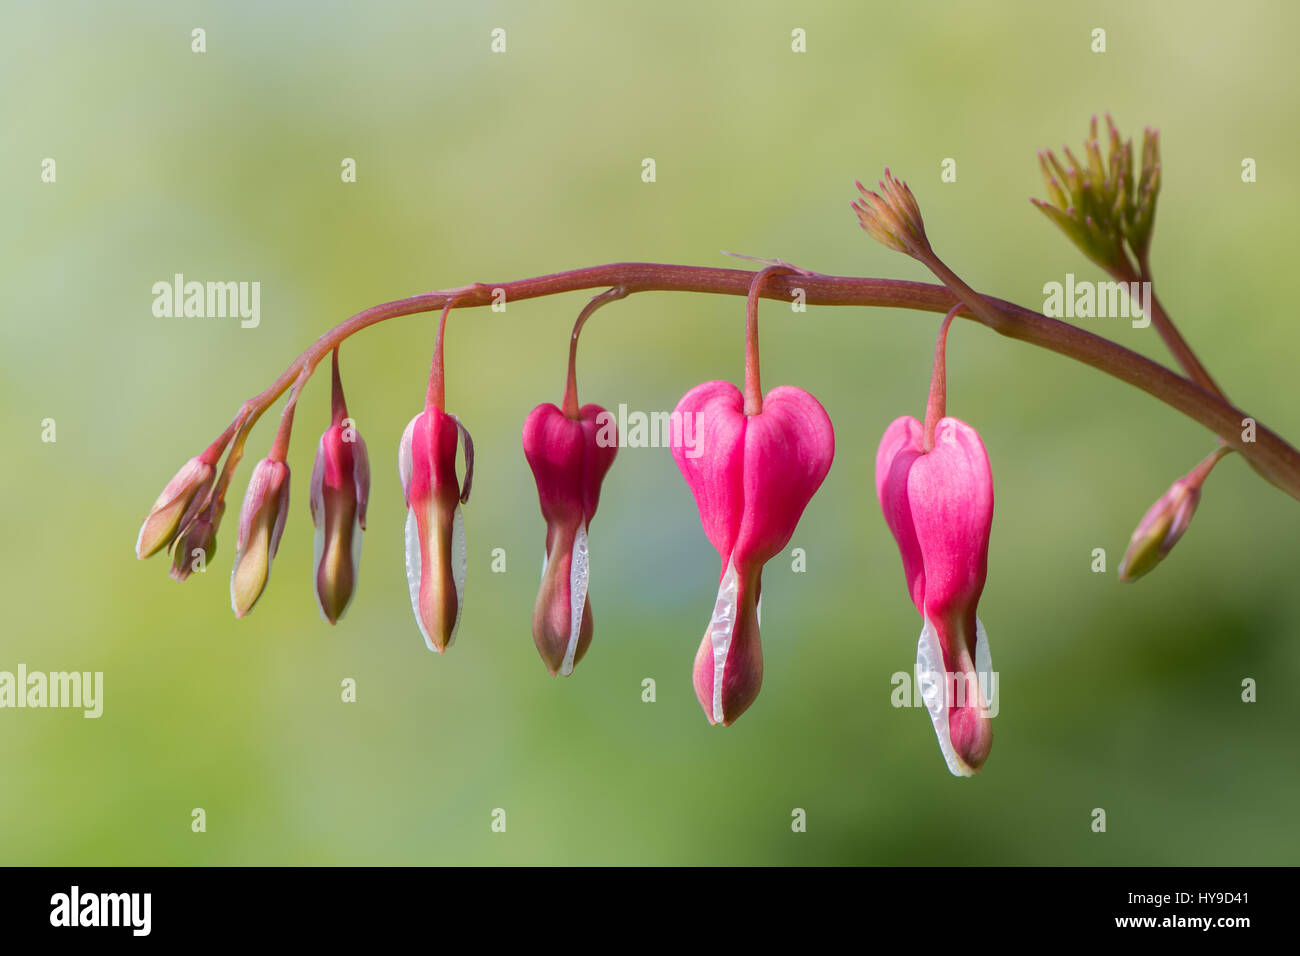 Bleeding heart (Lamprocapnos spectabilis) flowers. Raceme of pink and white flowers of plant in the poppy family (Papaveraceae) Stock Photo